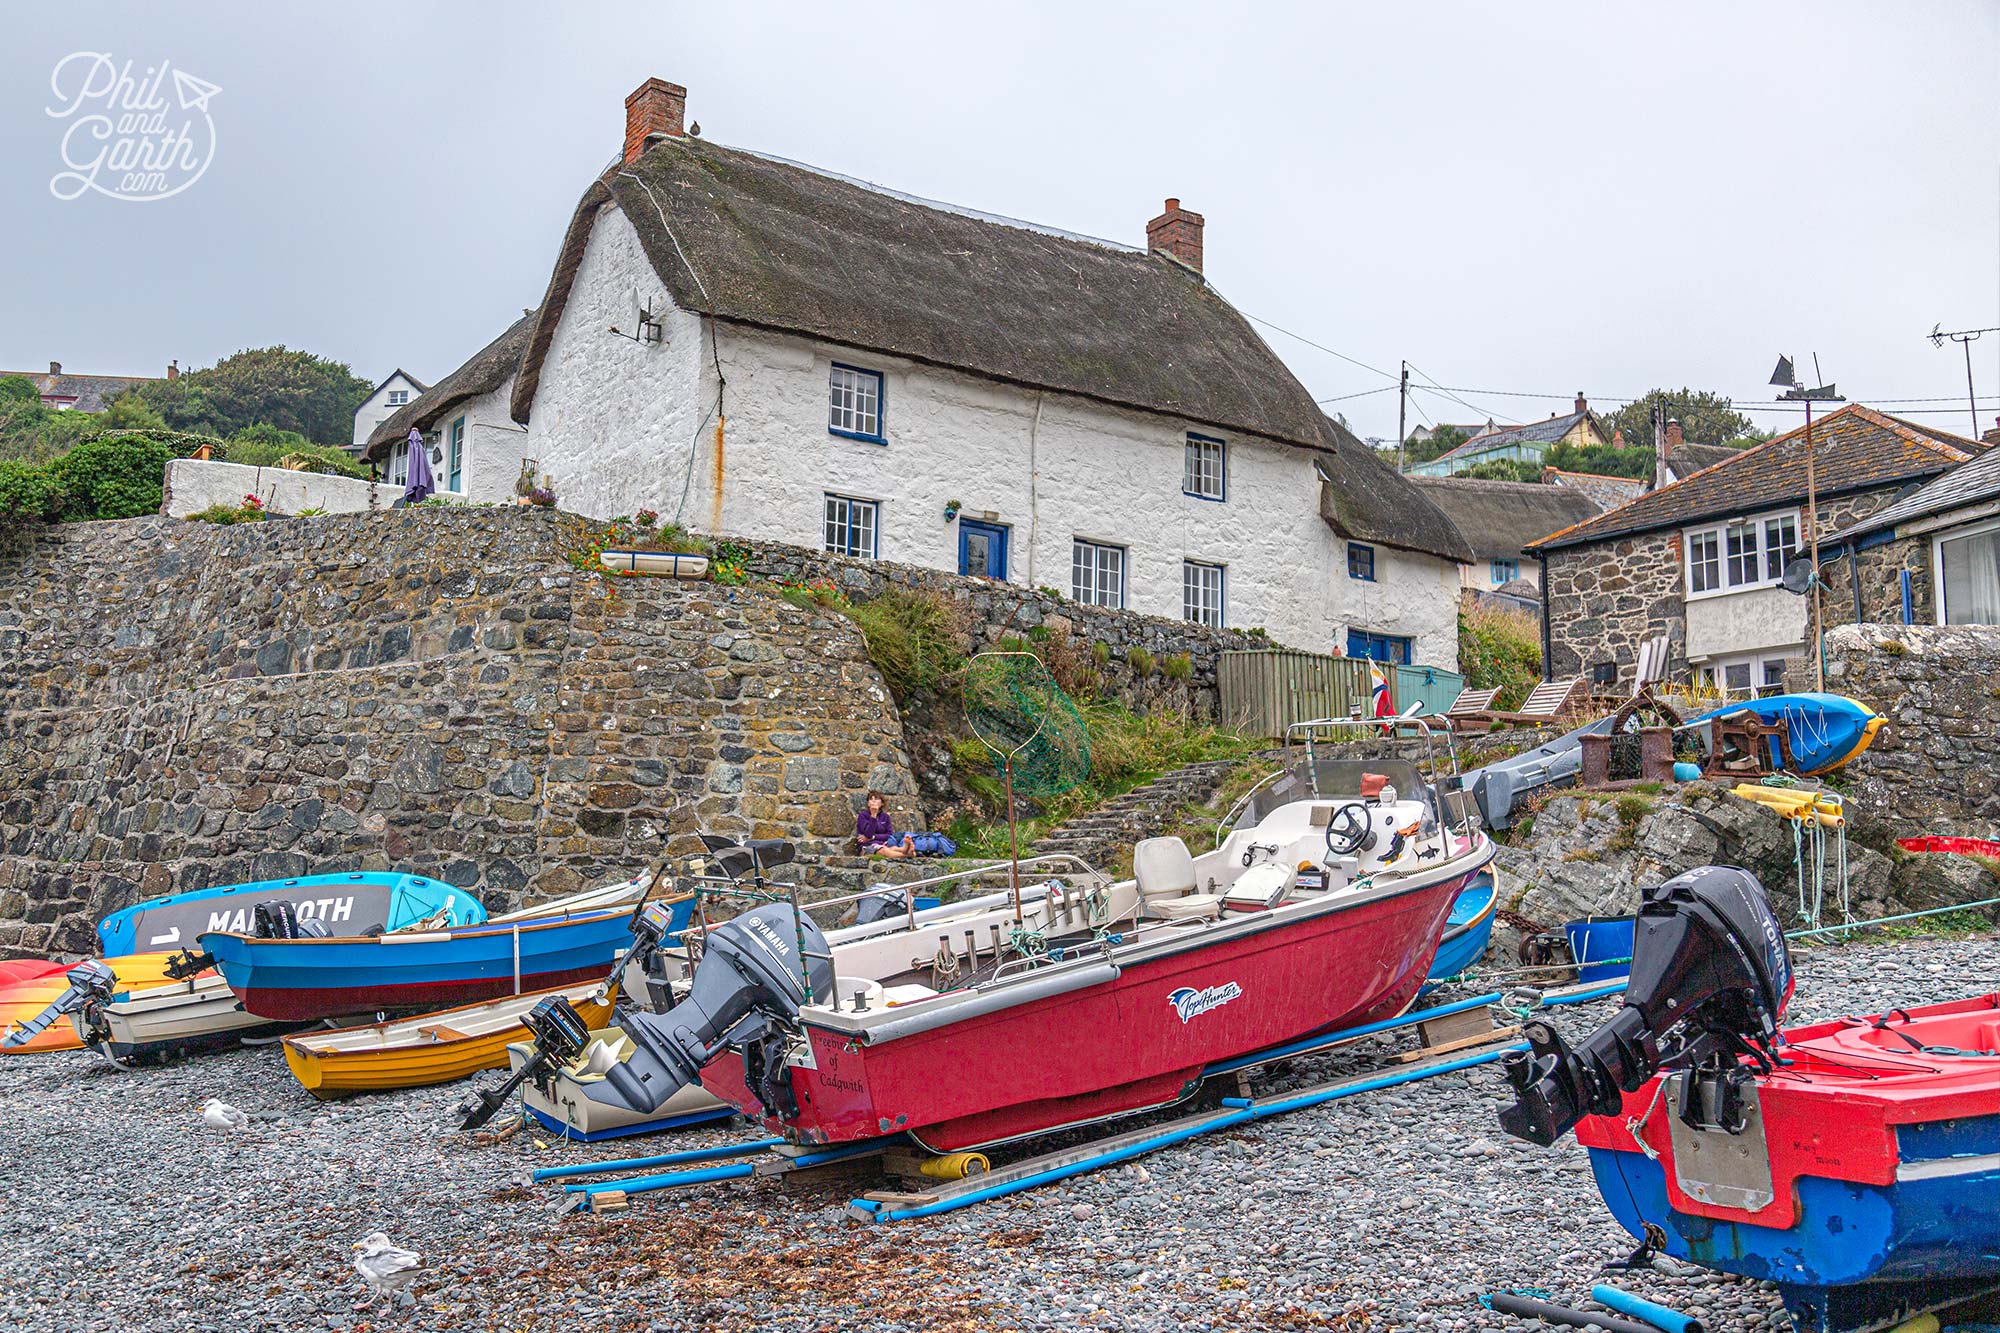 Cadgwith has two small pebble beaches where boats are winched onto the slipway